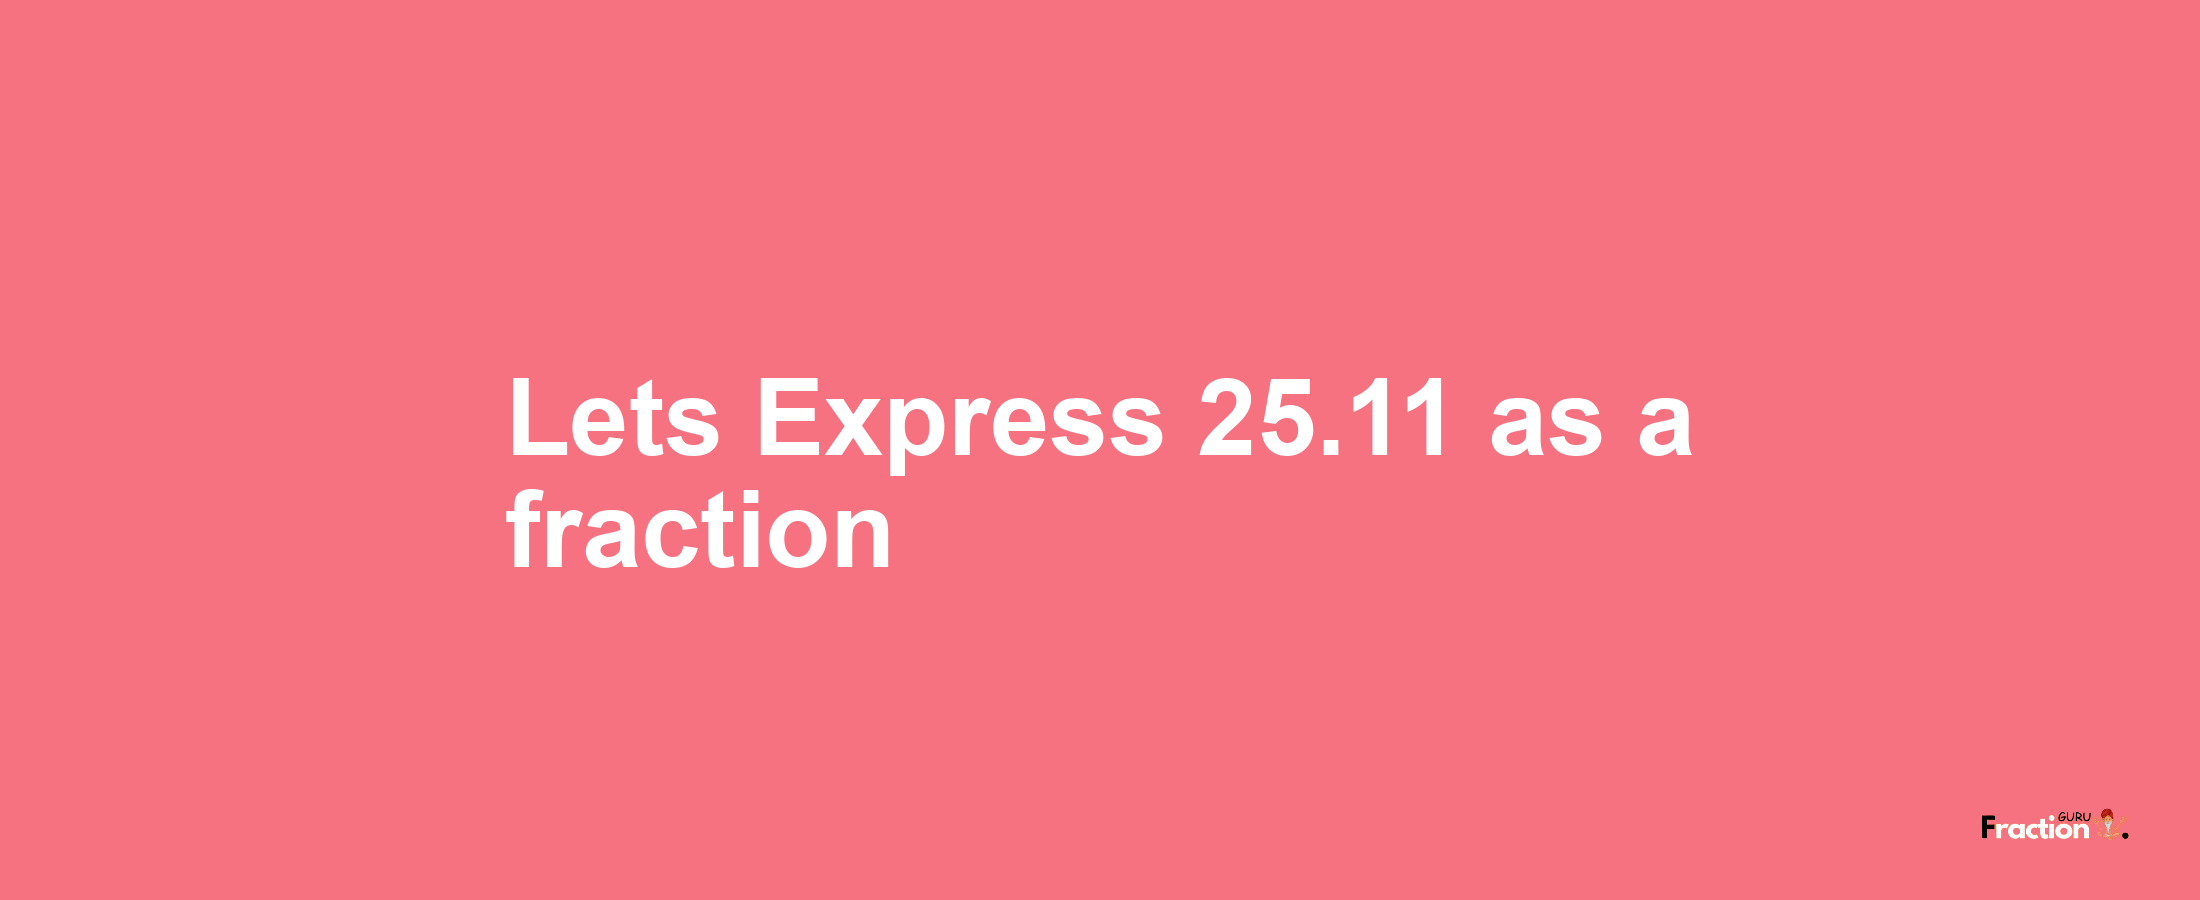 Lets Express 25.11 as afraction